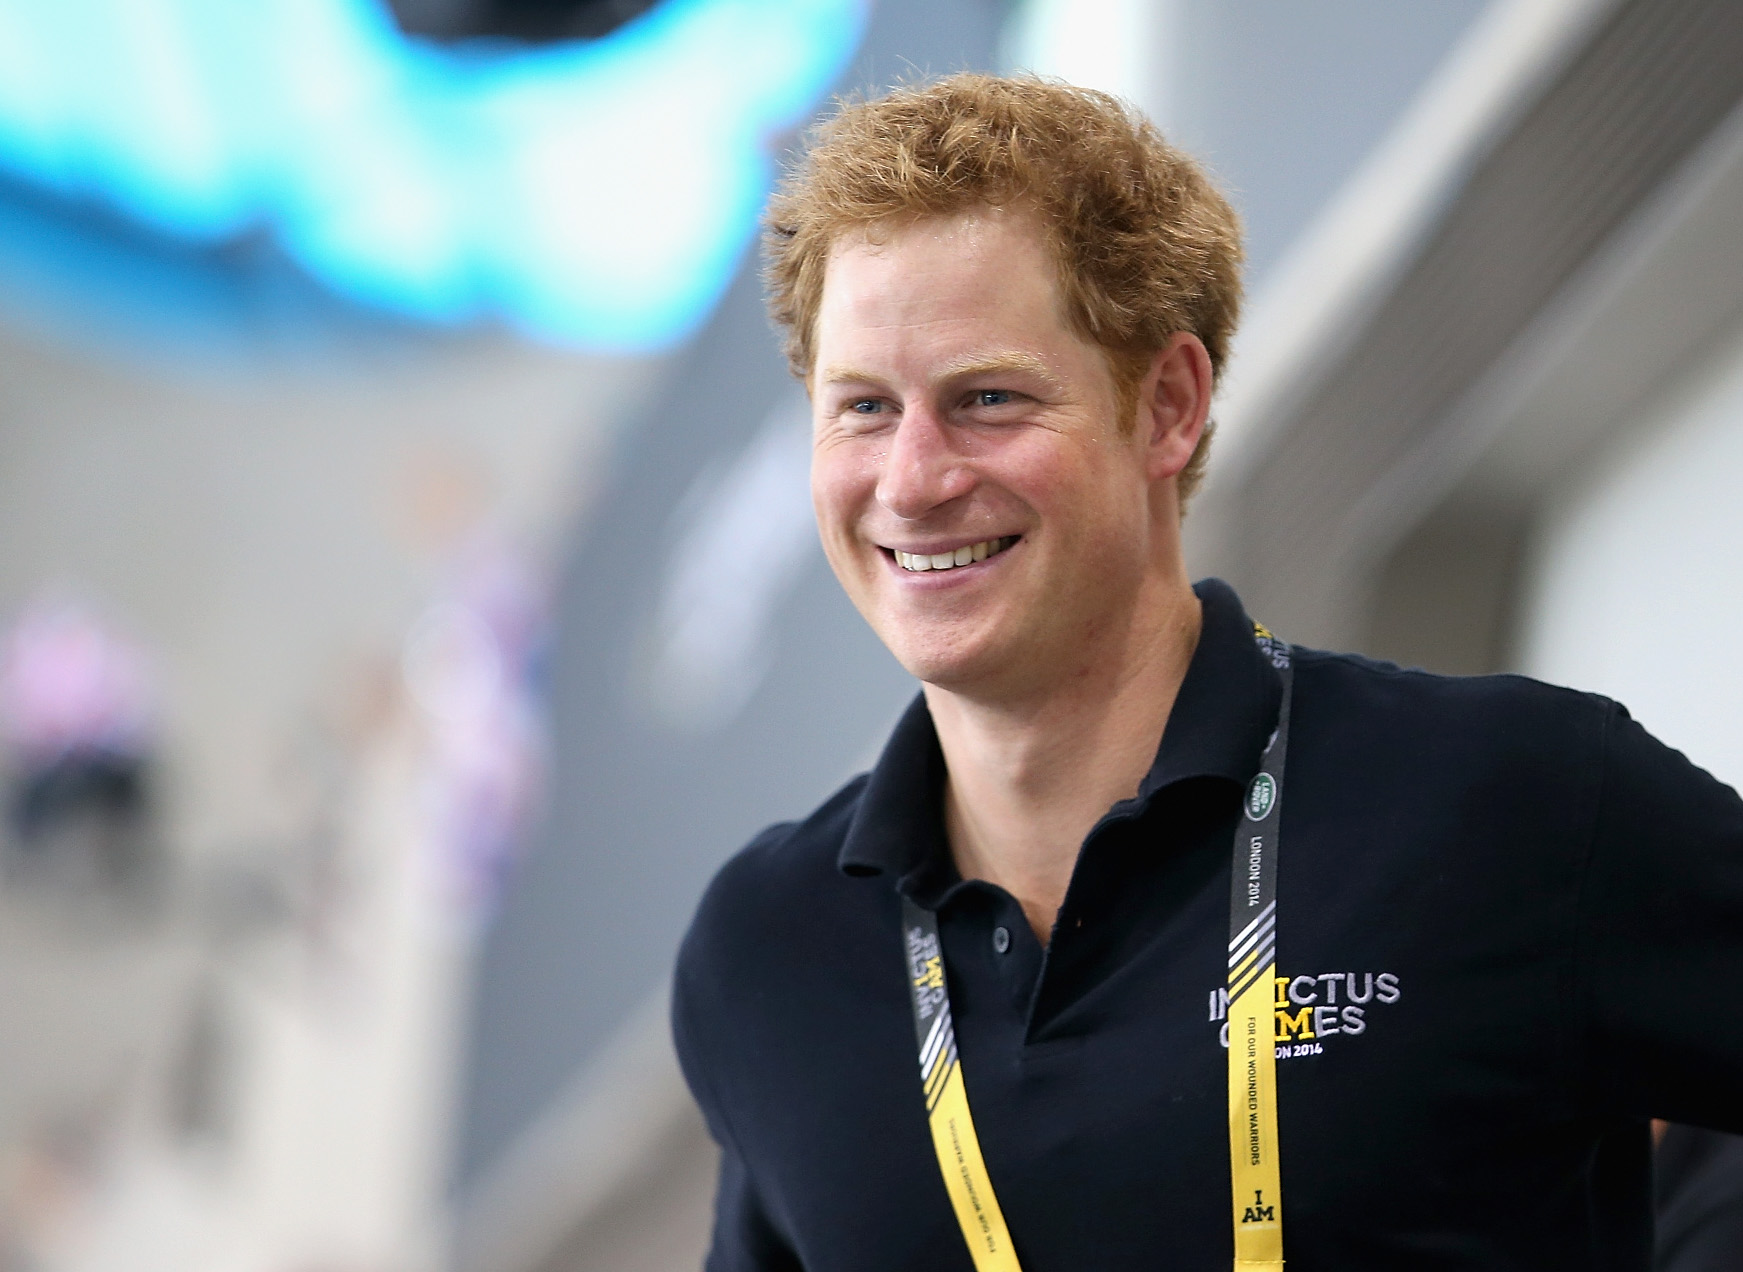 Prince Harry at the 2014 Invictus Games.